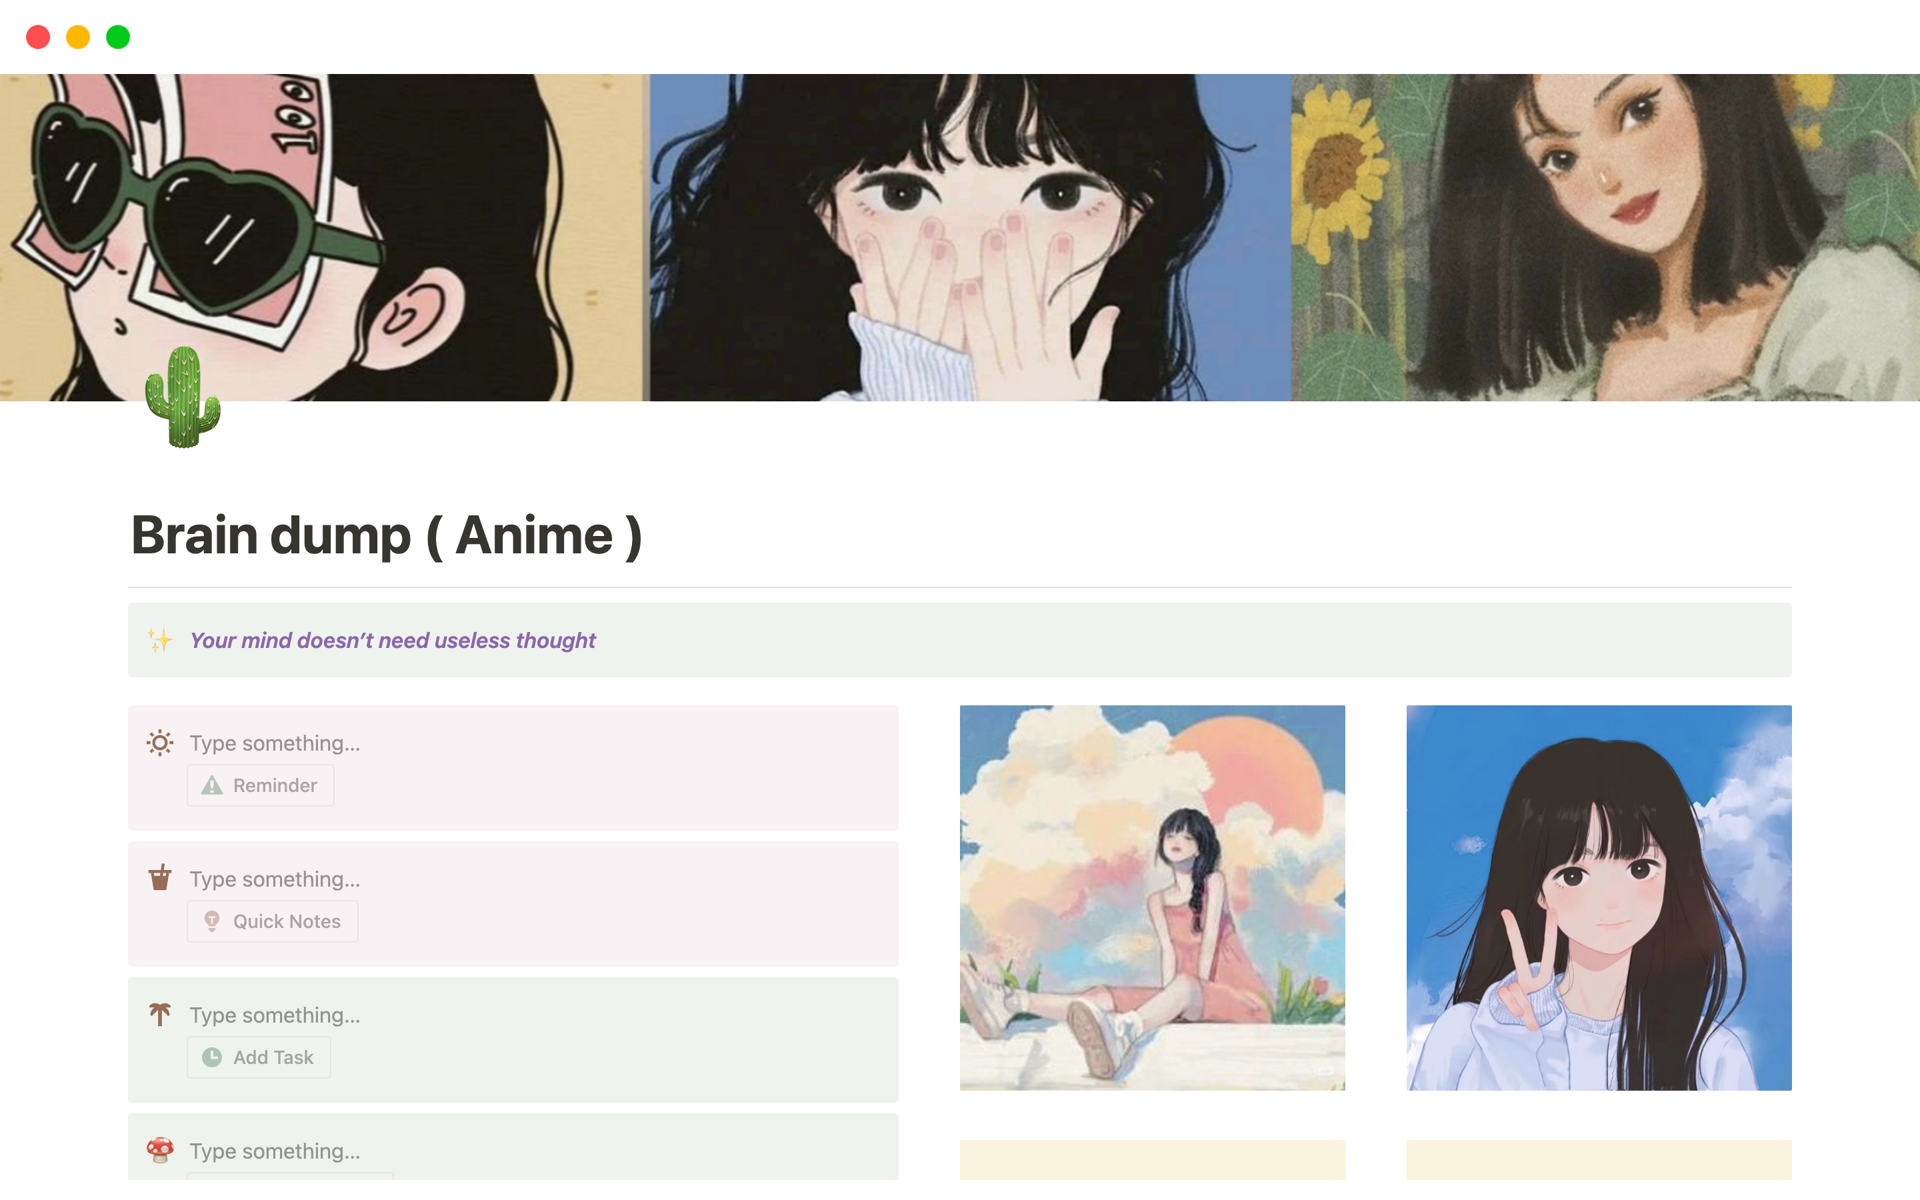 This is an anime-theme brain dump template that covers 4 different areas with 4 databases. 